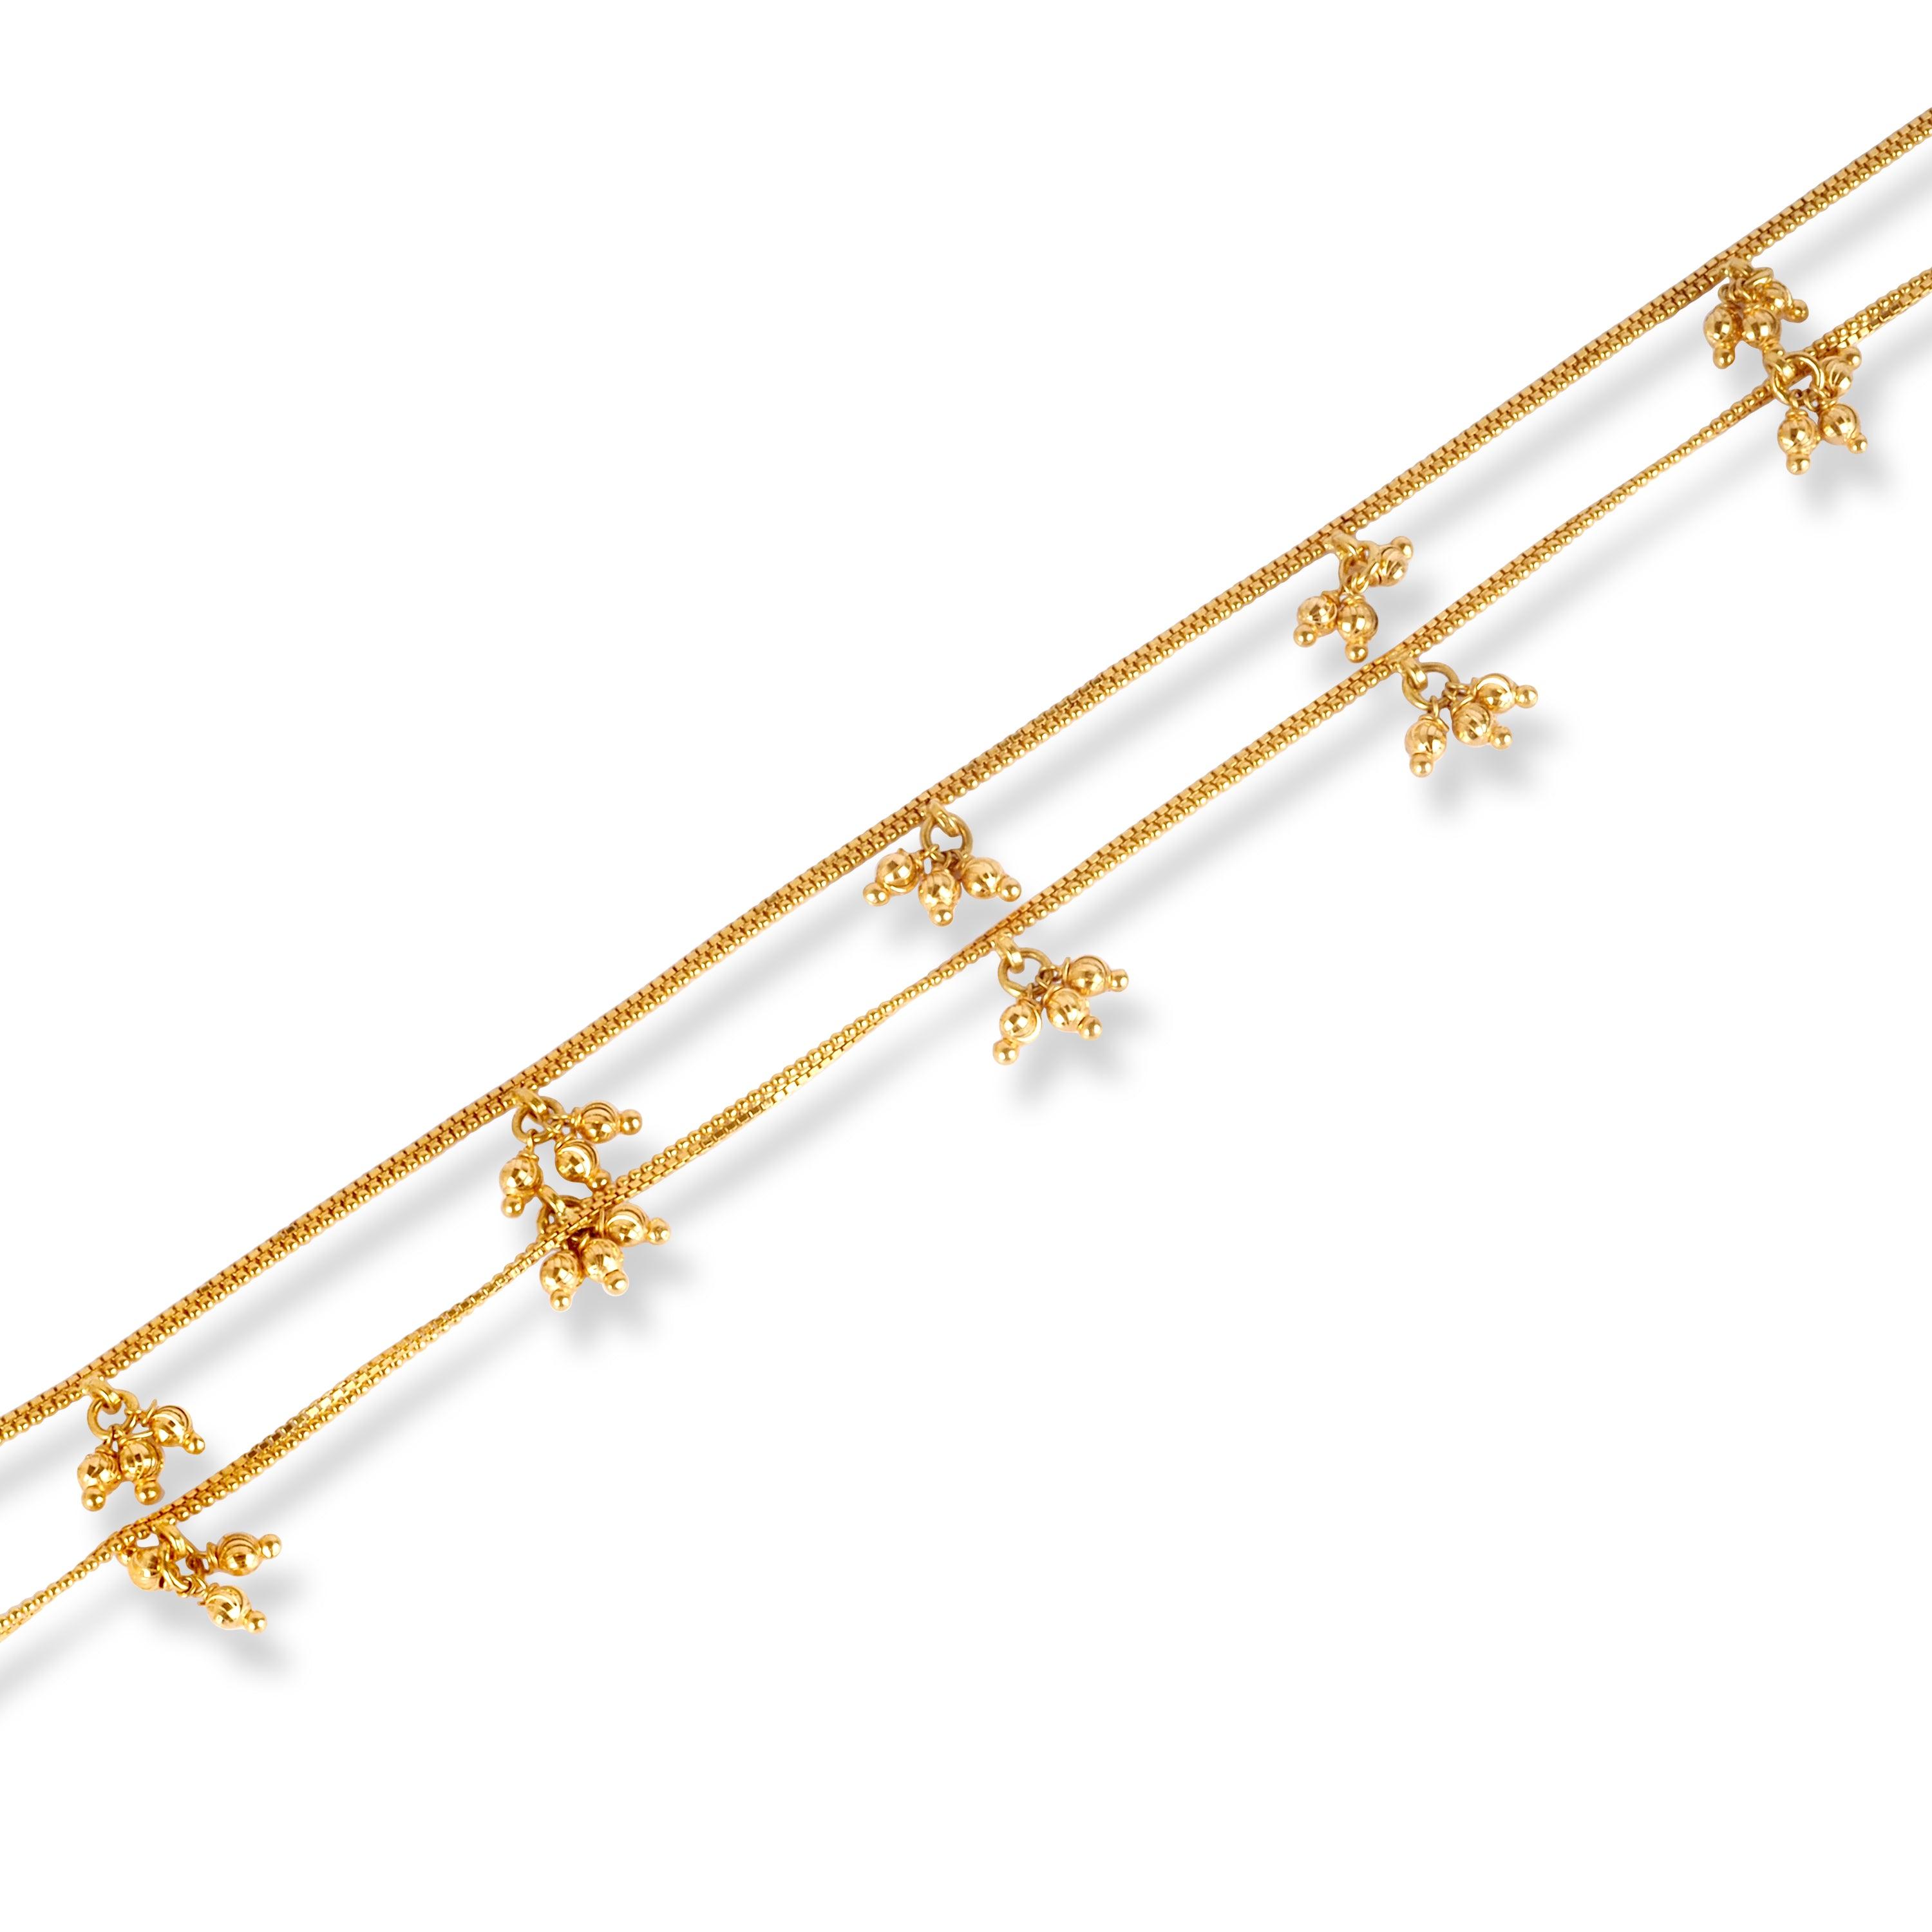 Pair of 22ct Gold Anklets in Box Chain Design with Ghughri Charm Drops & '' S '' Clasp A-8270 - Minar Jewellers